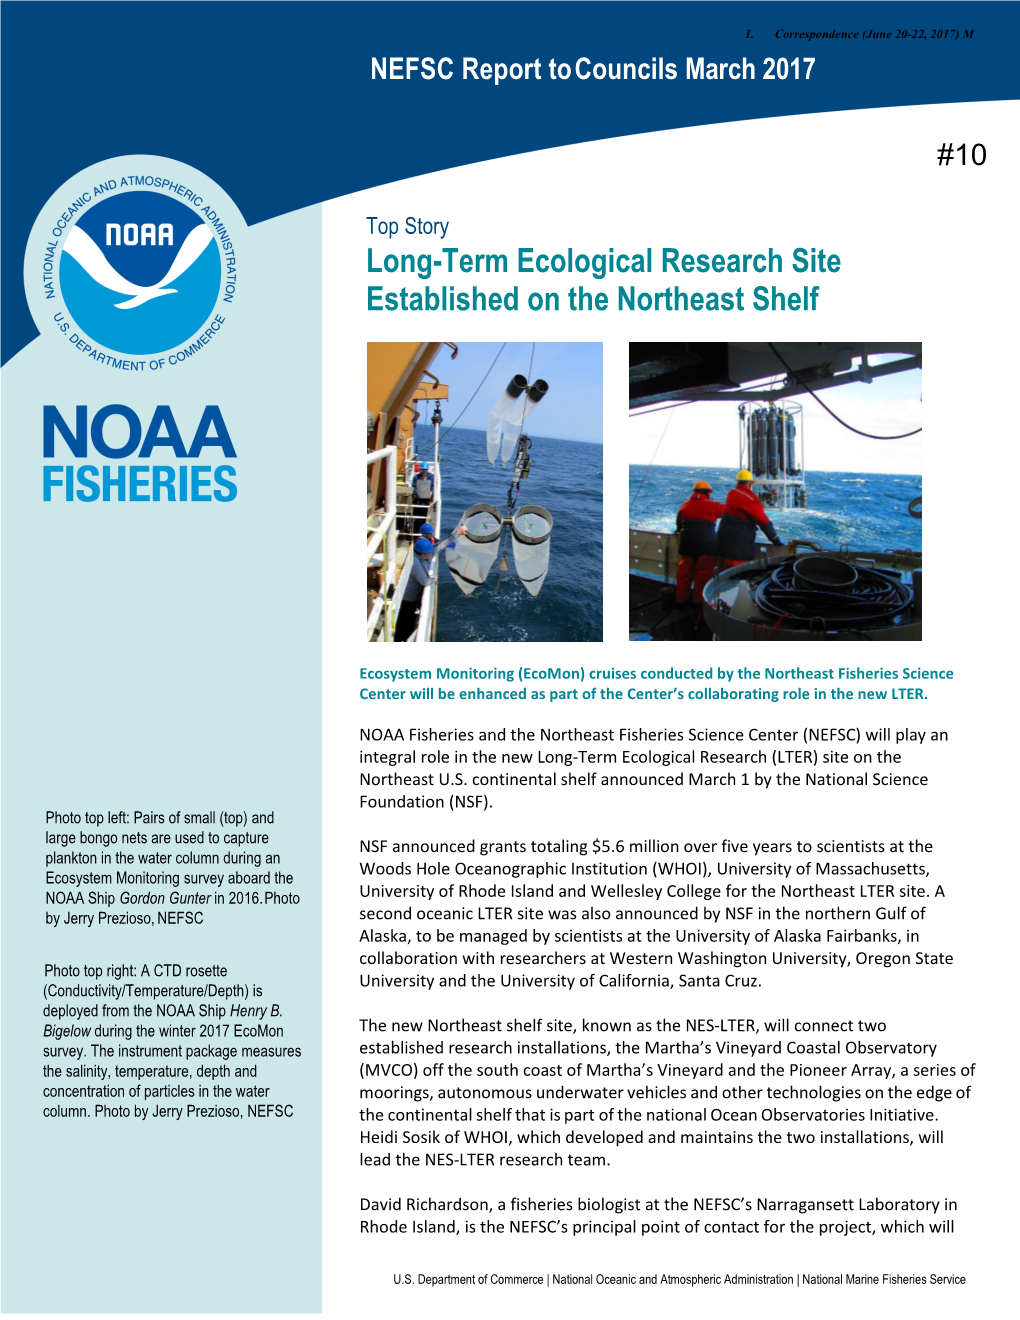 Long-Term Ecological Research Site Established on the Northeast Shelf